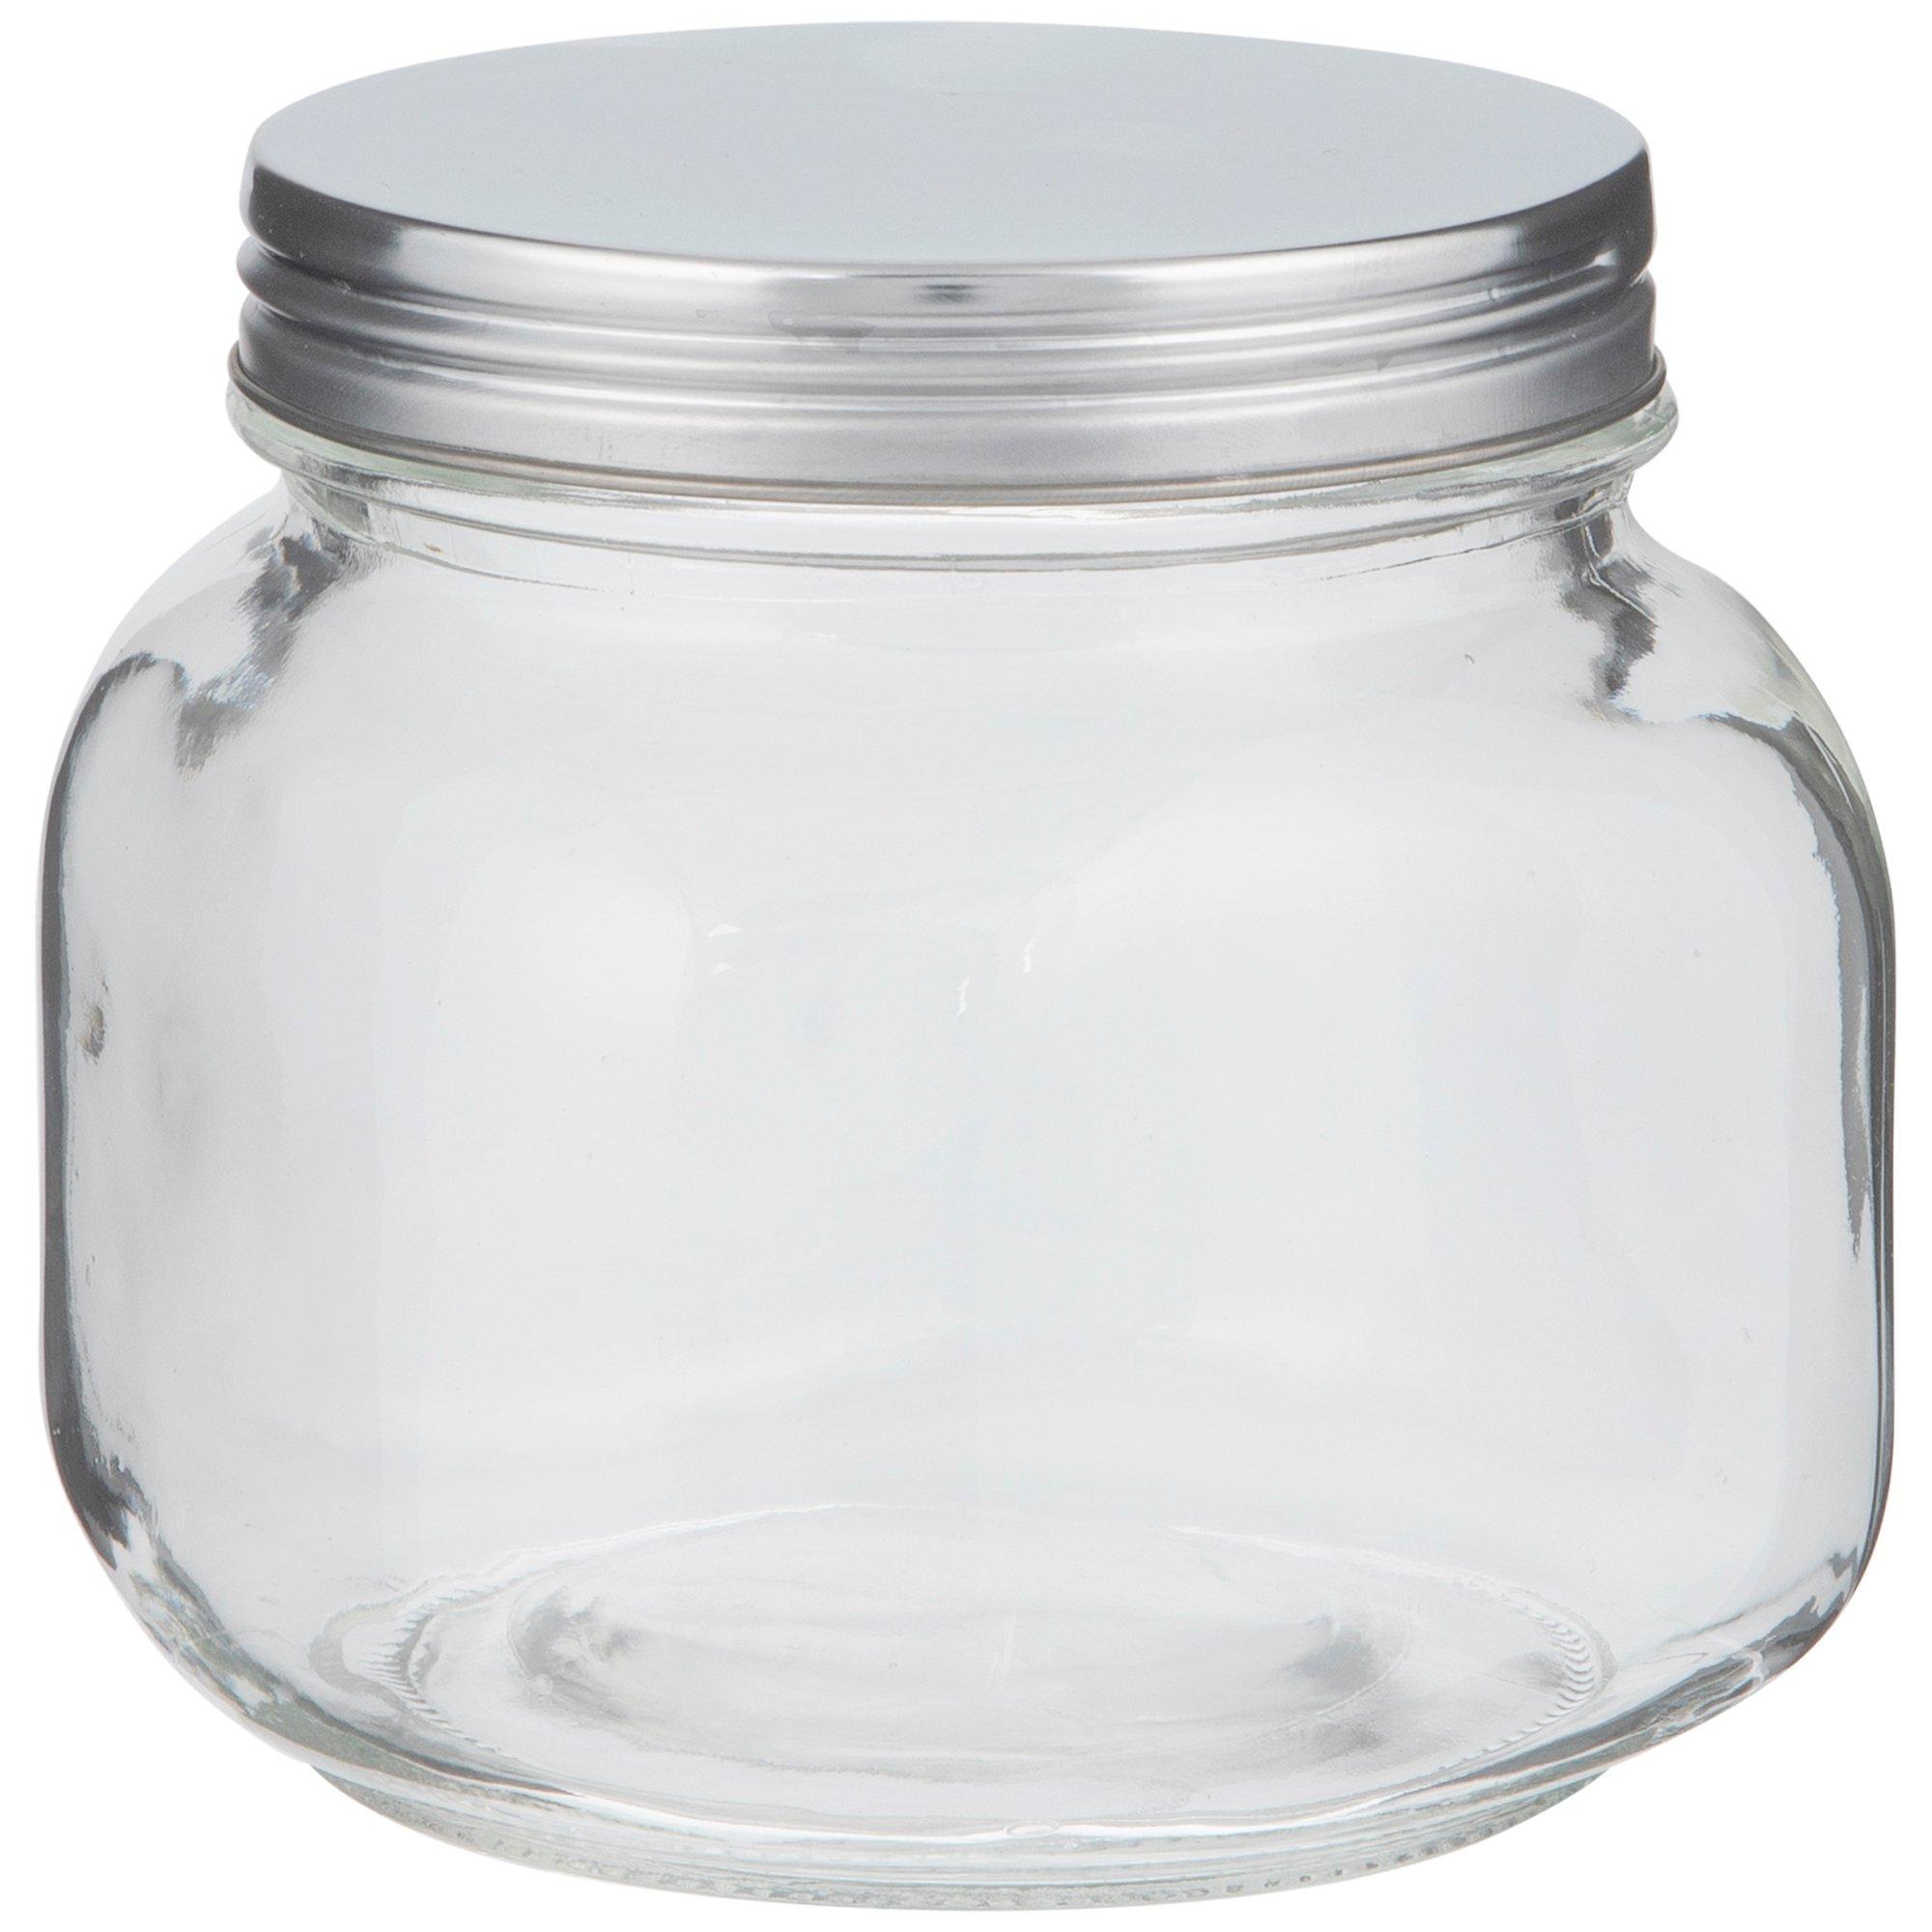 Clear Glass Decorative Jars with Engraved Silver Lids (Set of 3